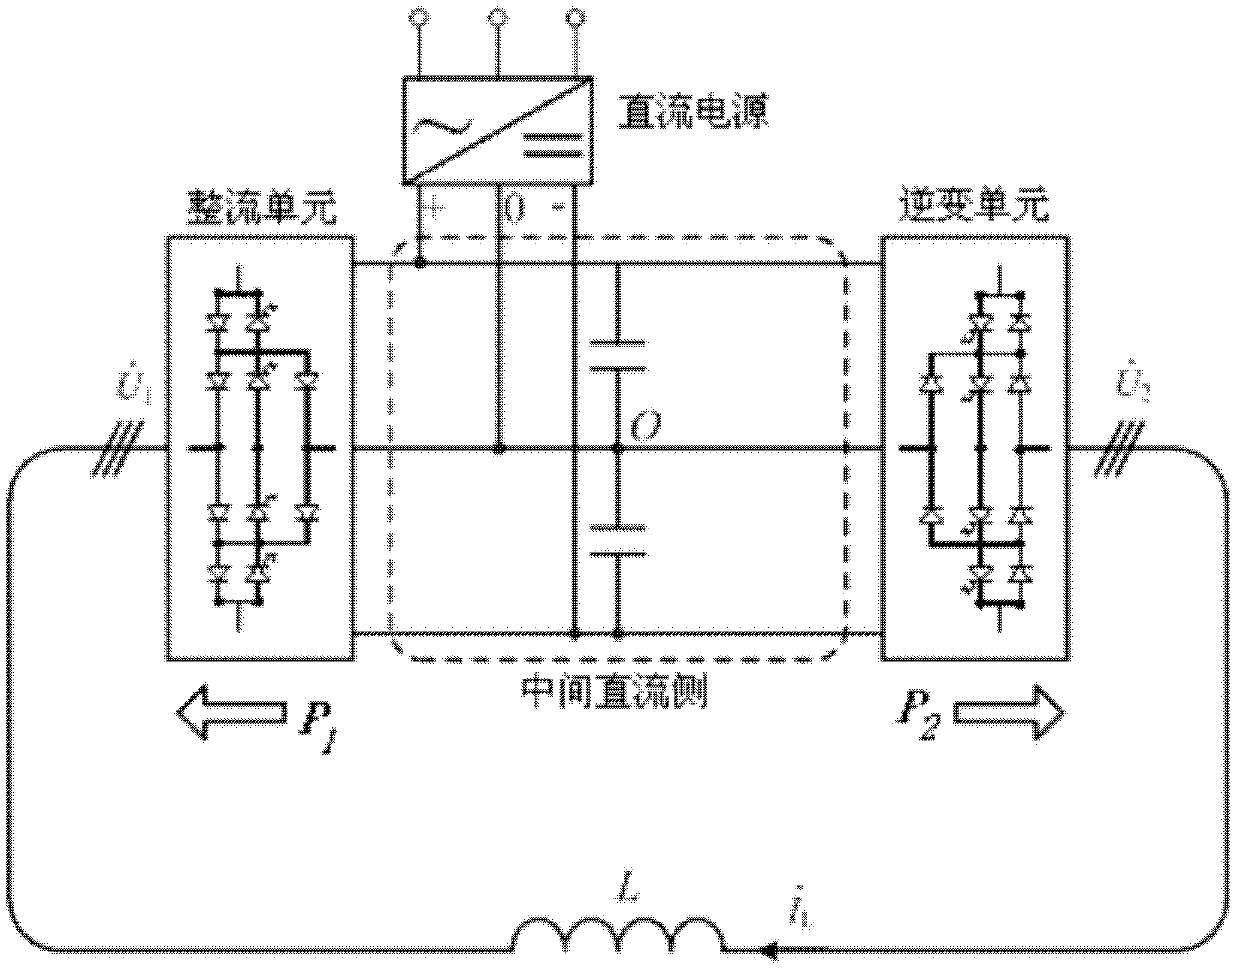 High-power three-level frequency converter temperature rise and loss testing method employing active front end